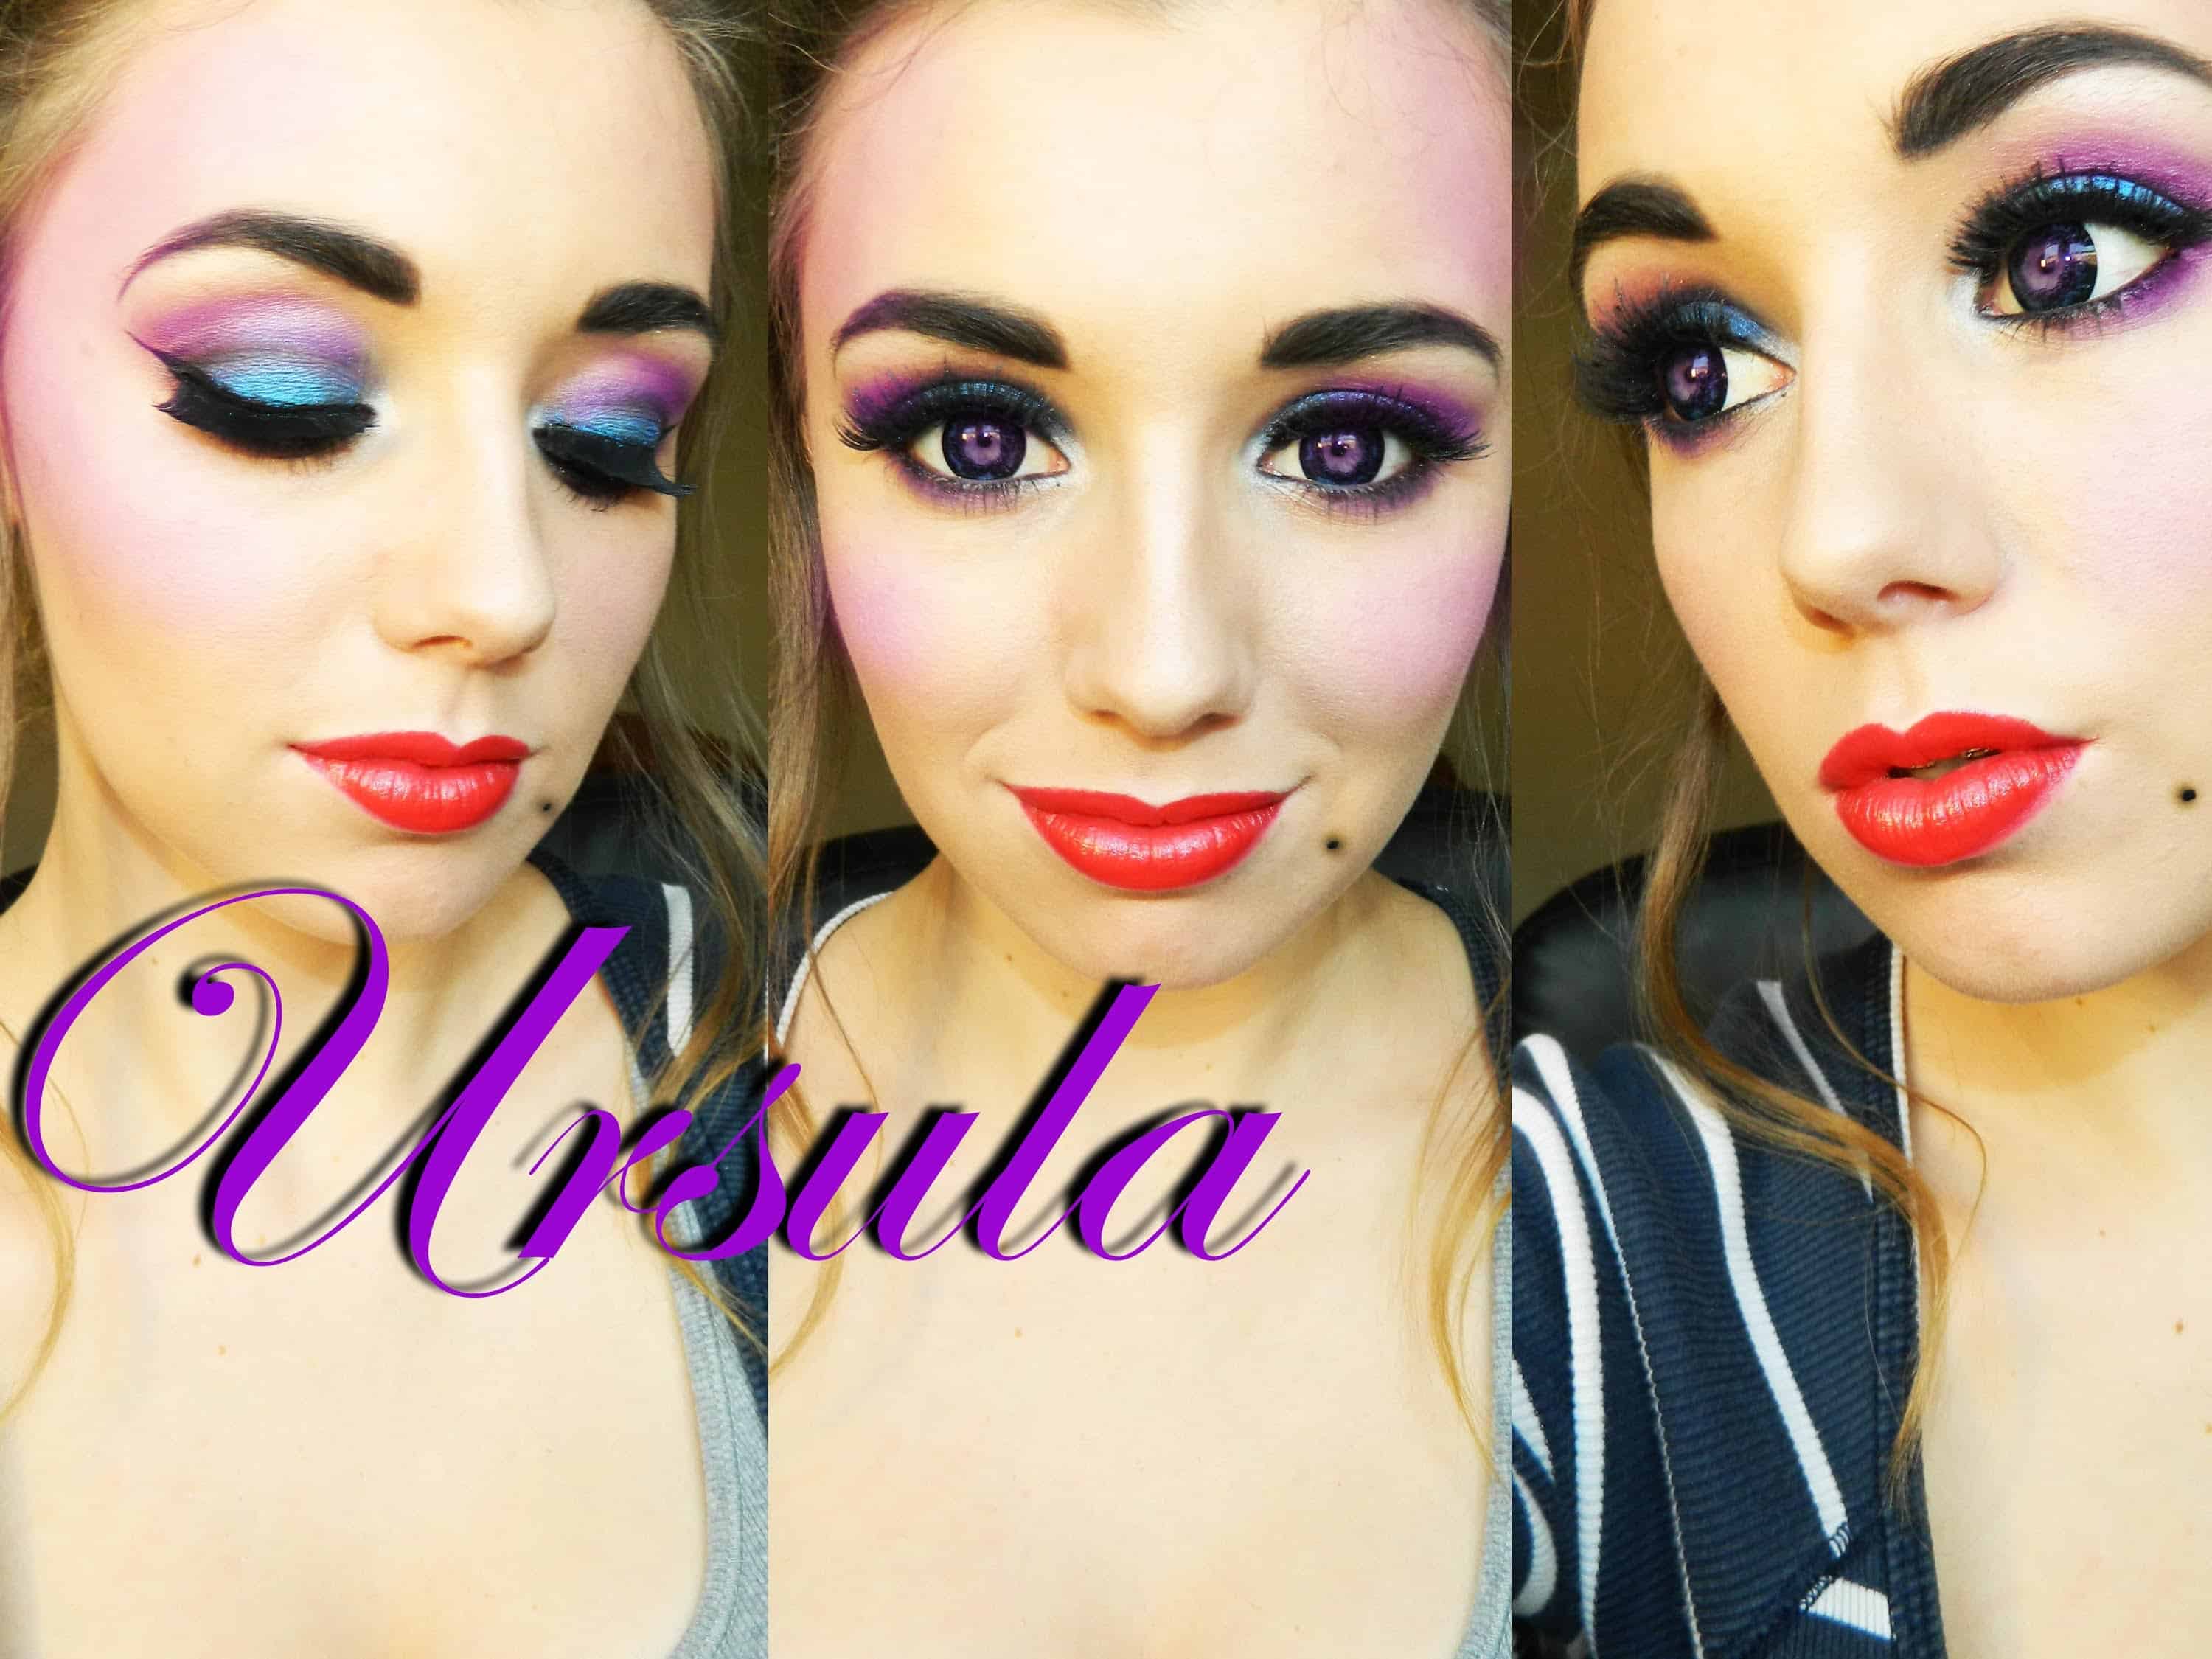 Ursula the sea witch inspired makeup